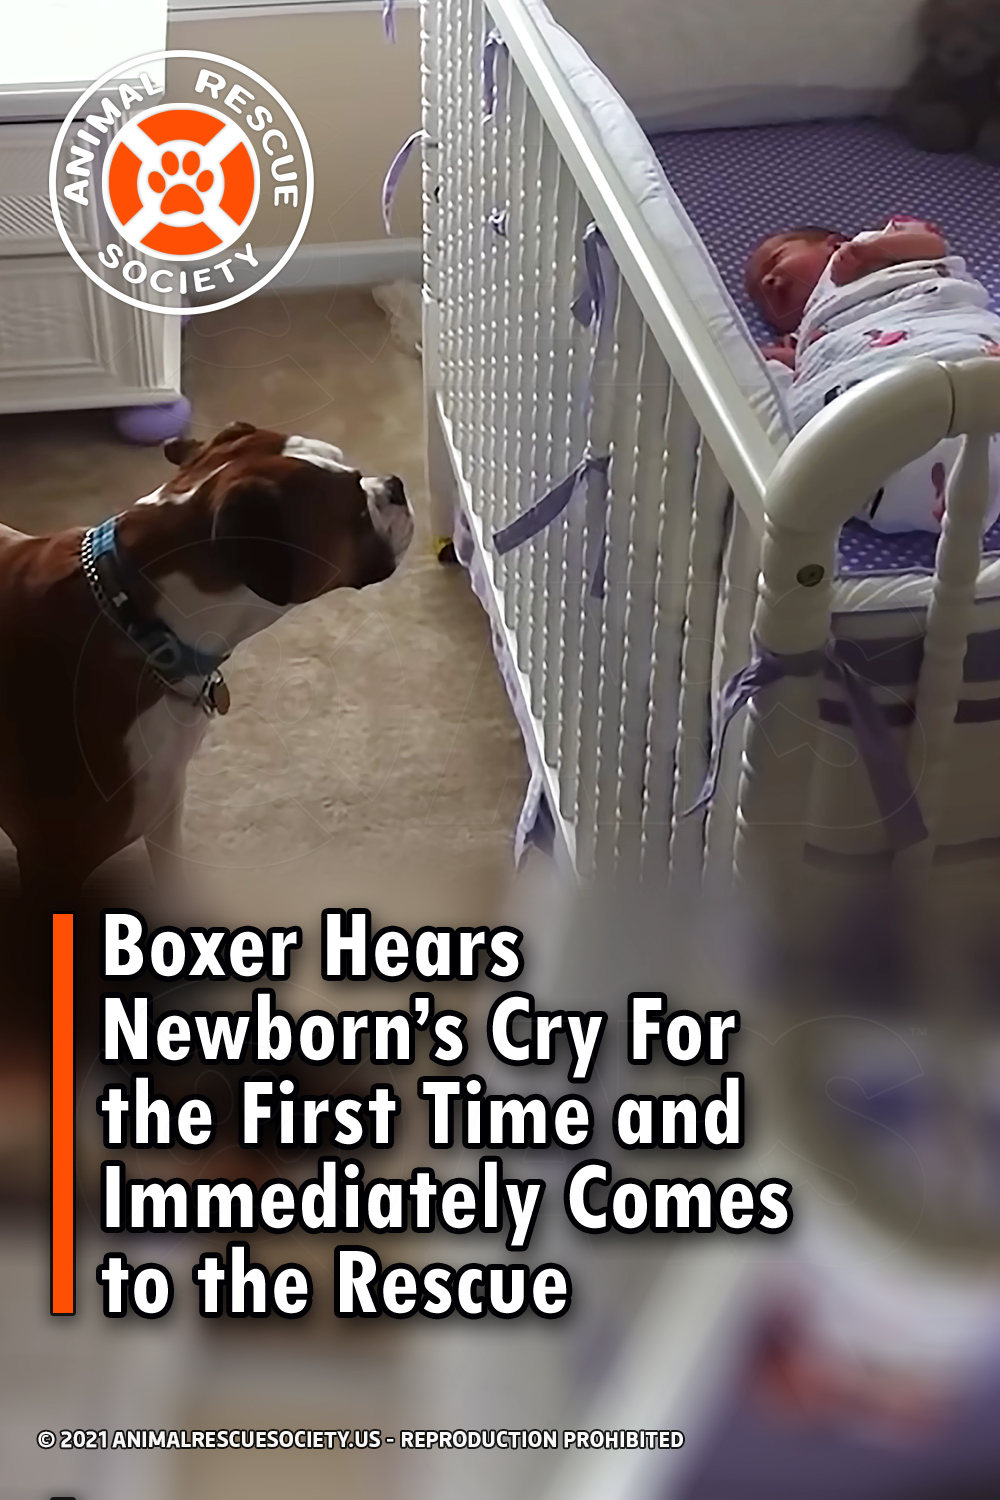 Boxer Hears Newborn’s Cry For the First Time and Immediately Comes to the Rescue